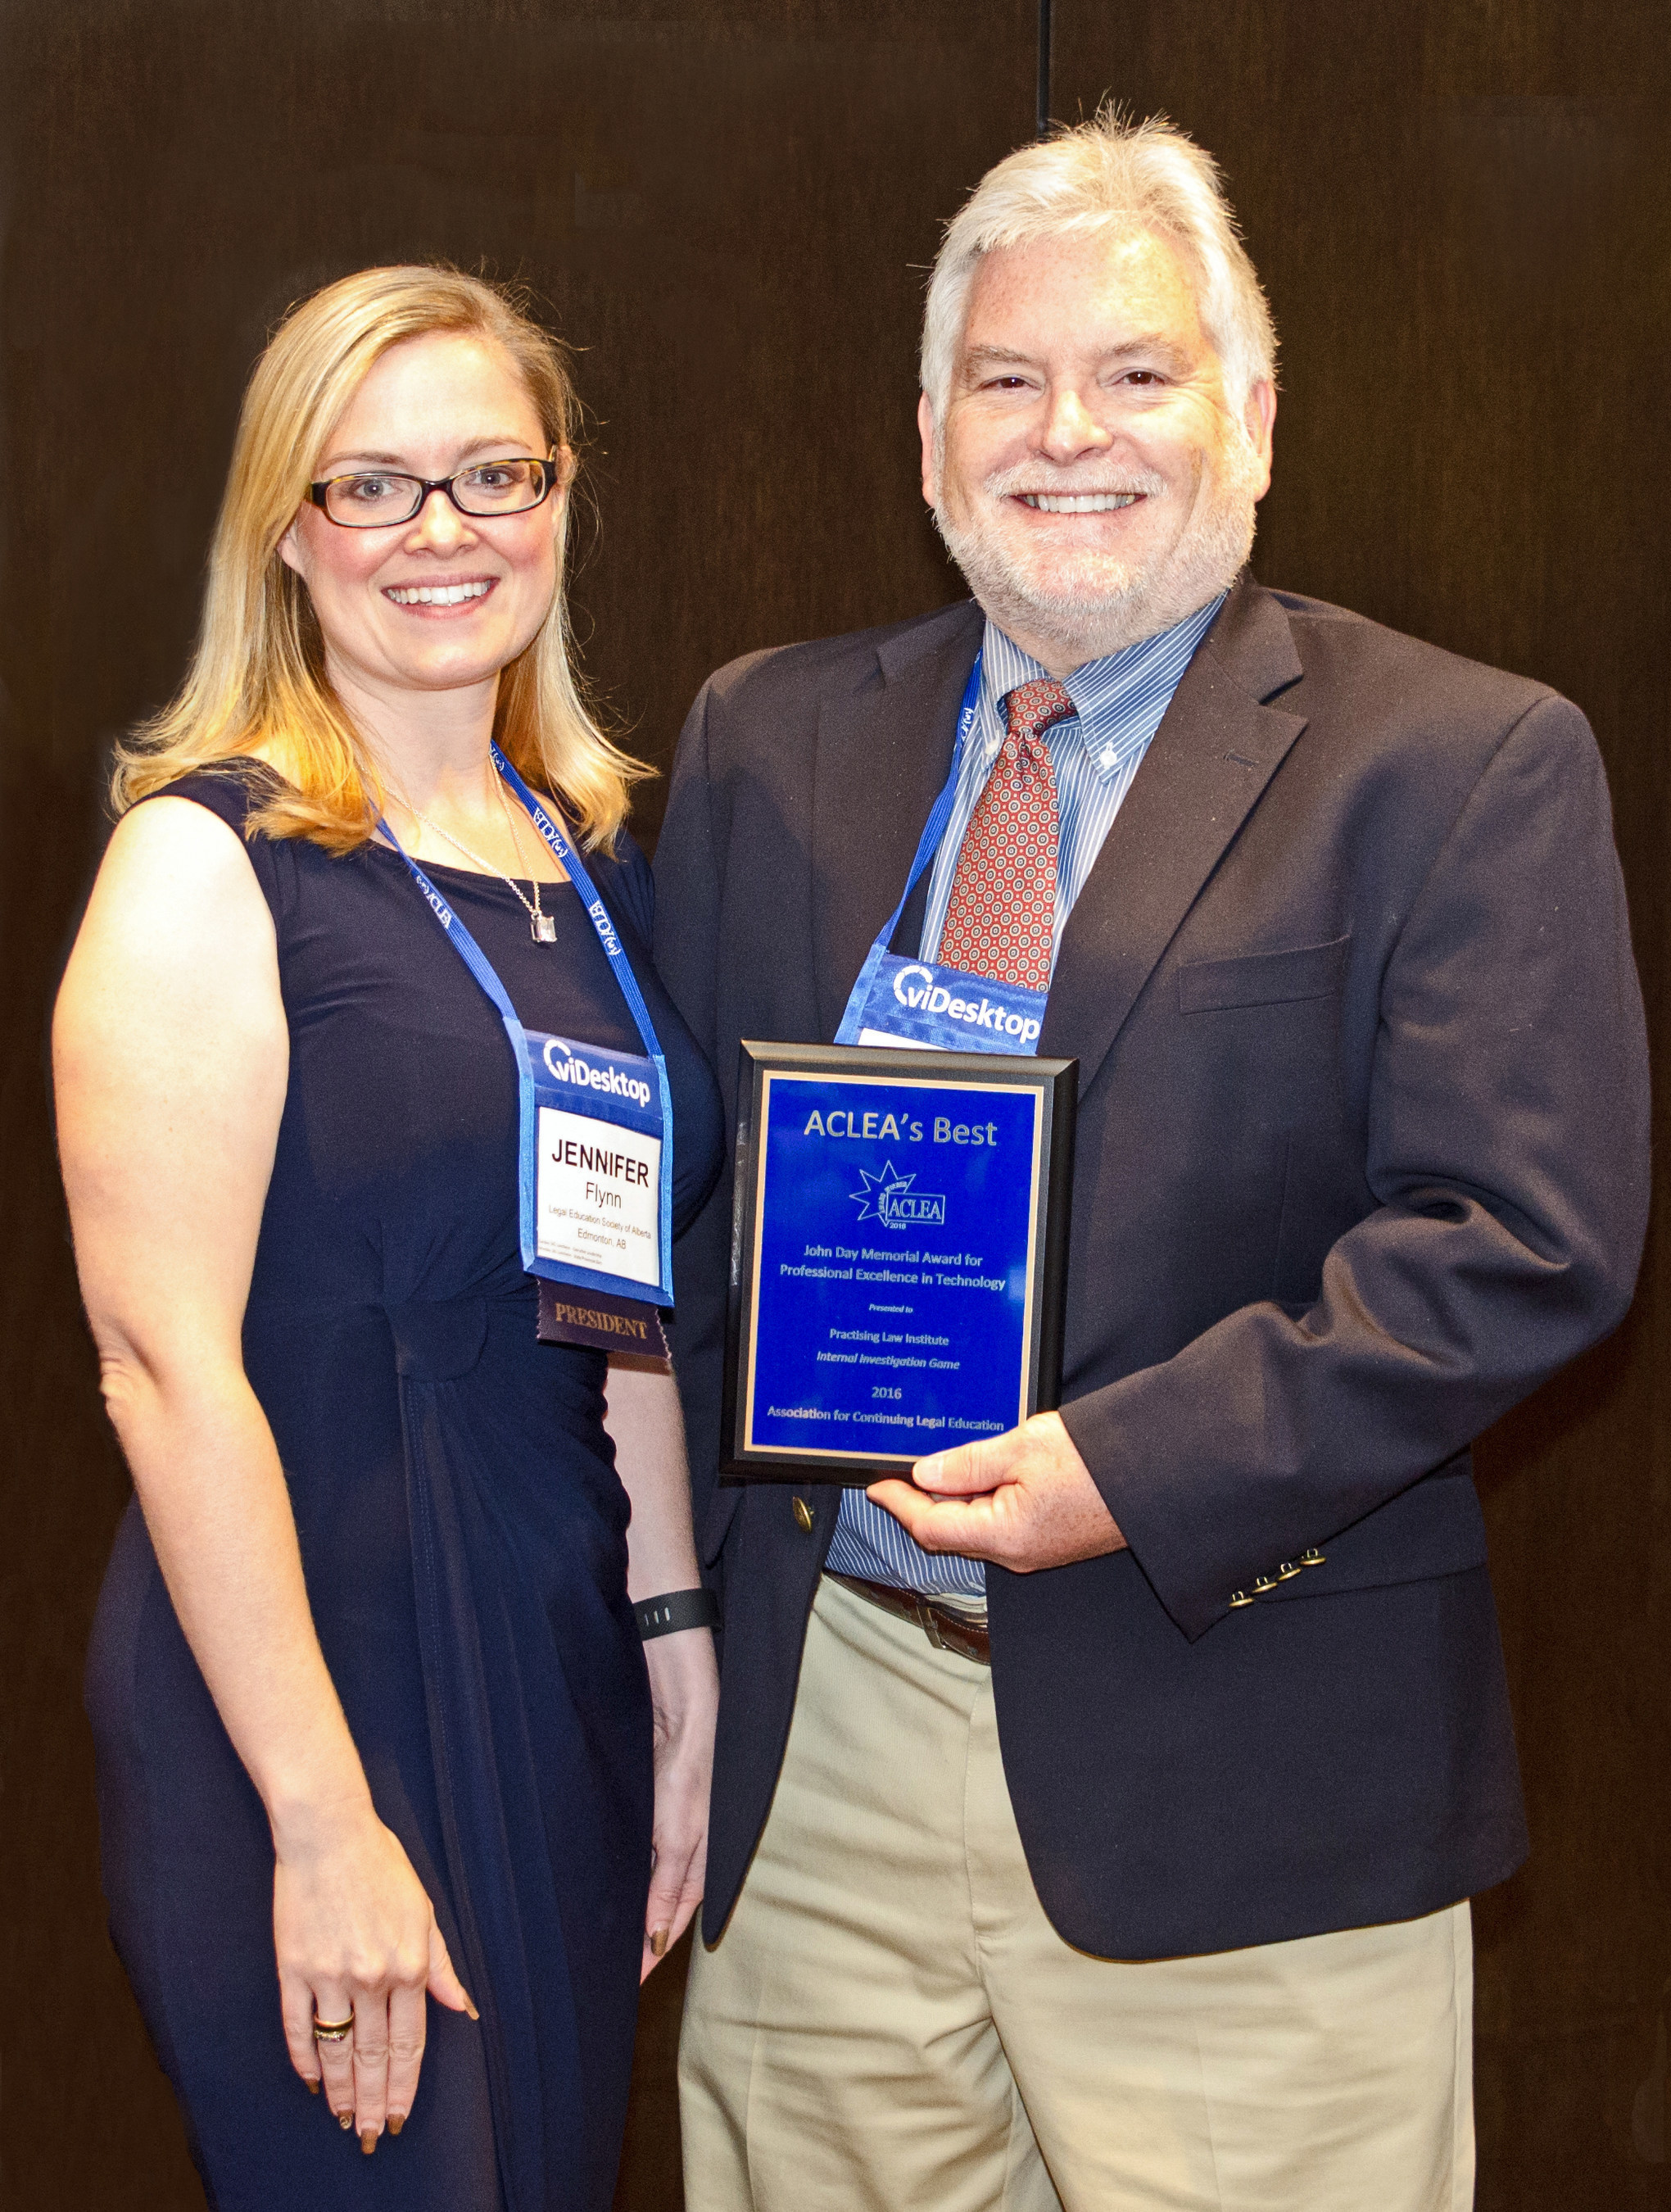 ACLEA President, Jennifer Flynn presents Dr. JC Kinnamon, Director of the Office of Research and Development at the Practising Law Institute, with the Outstanding Achievement in Technology Award at the Association for Continuing Legal Education (ACLEA) meeting in Seattle on August 2.